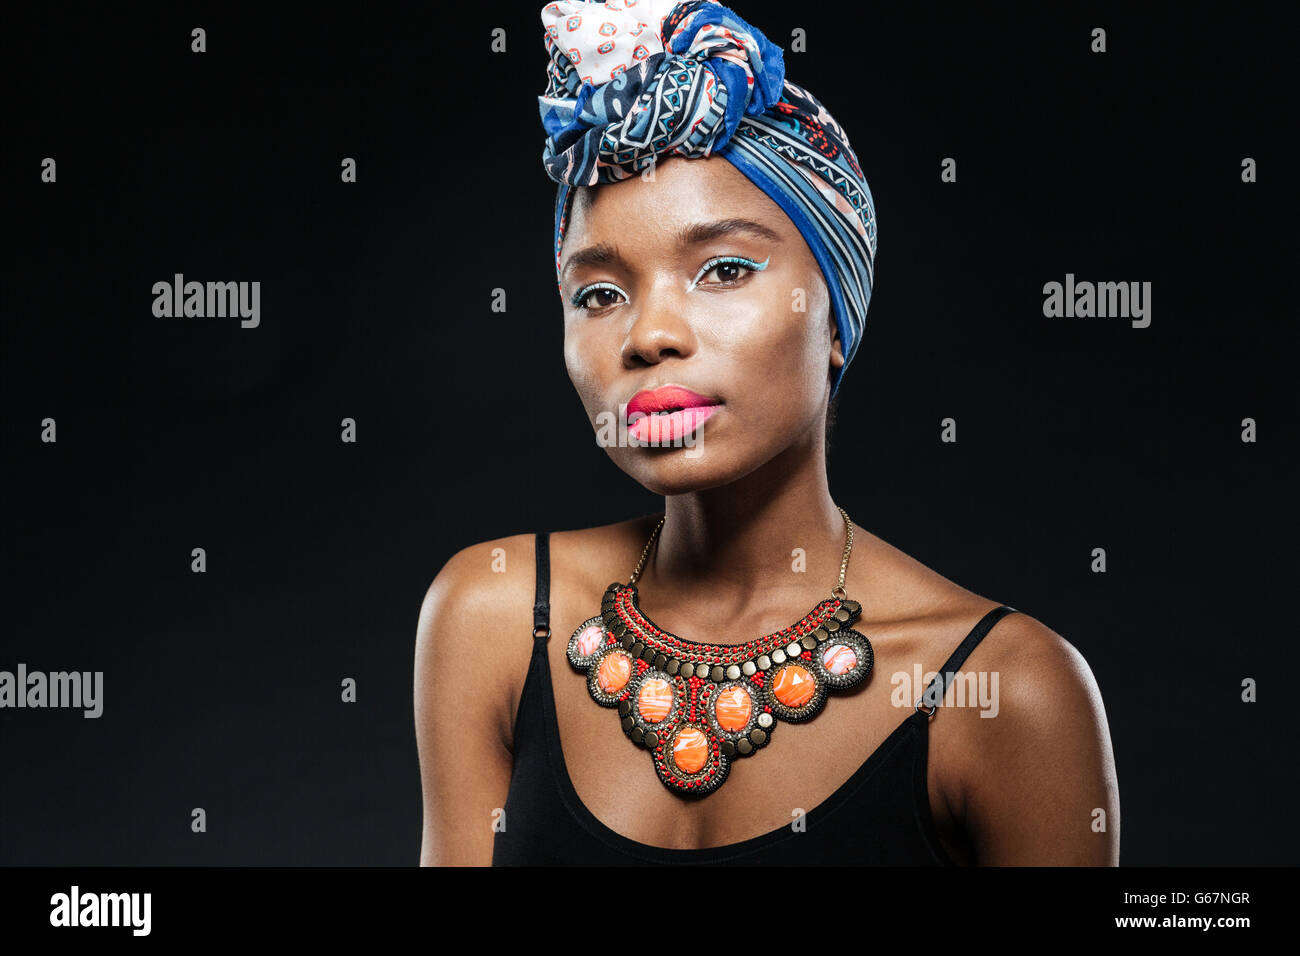 Portrait of a young afro american woman wearing a blue headscarf isolated on the black background Stock Photo